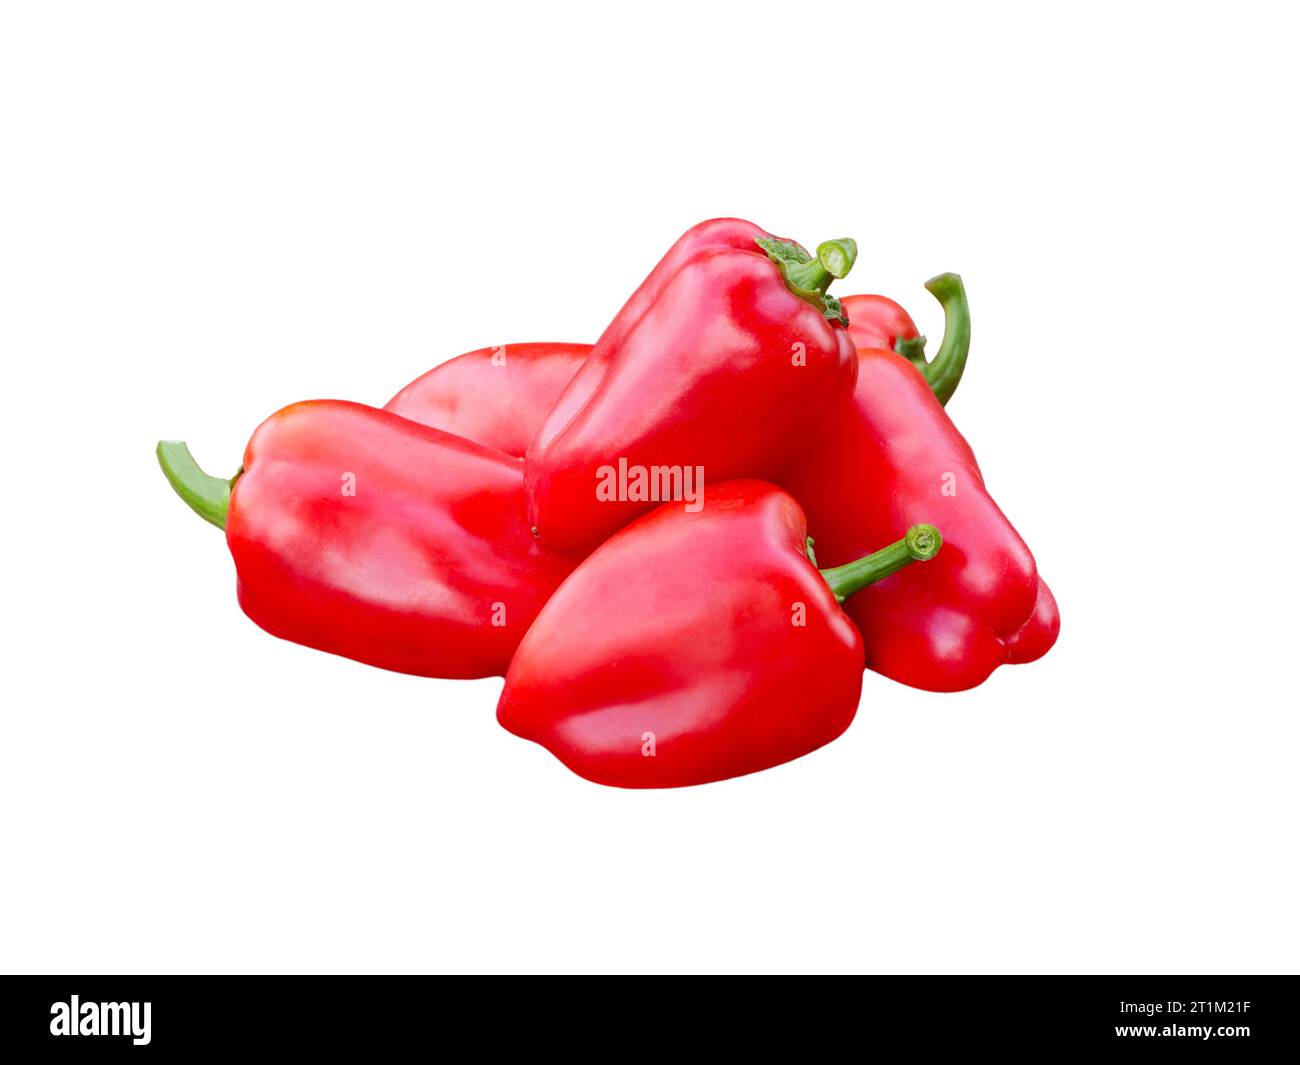 Sweet red pepper isolated on white background. Stock Photo